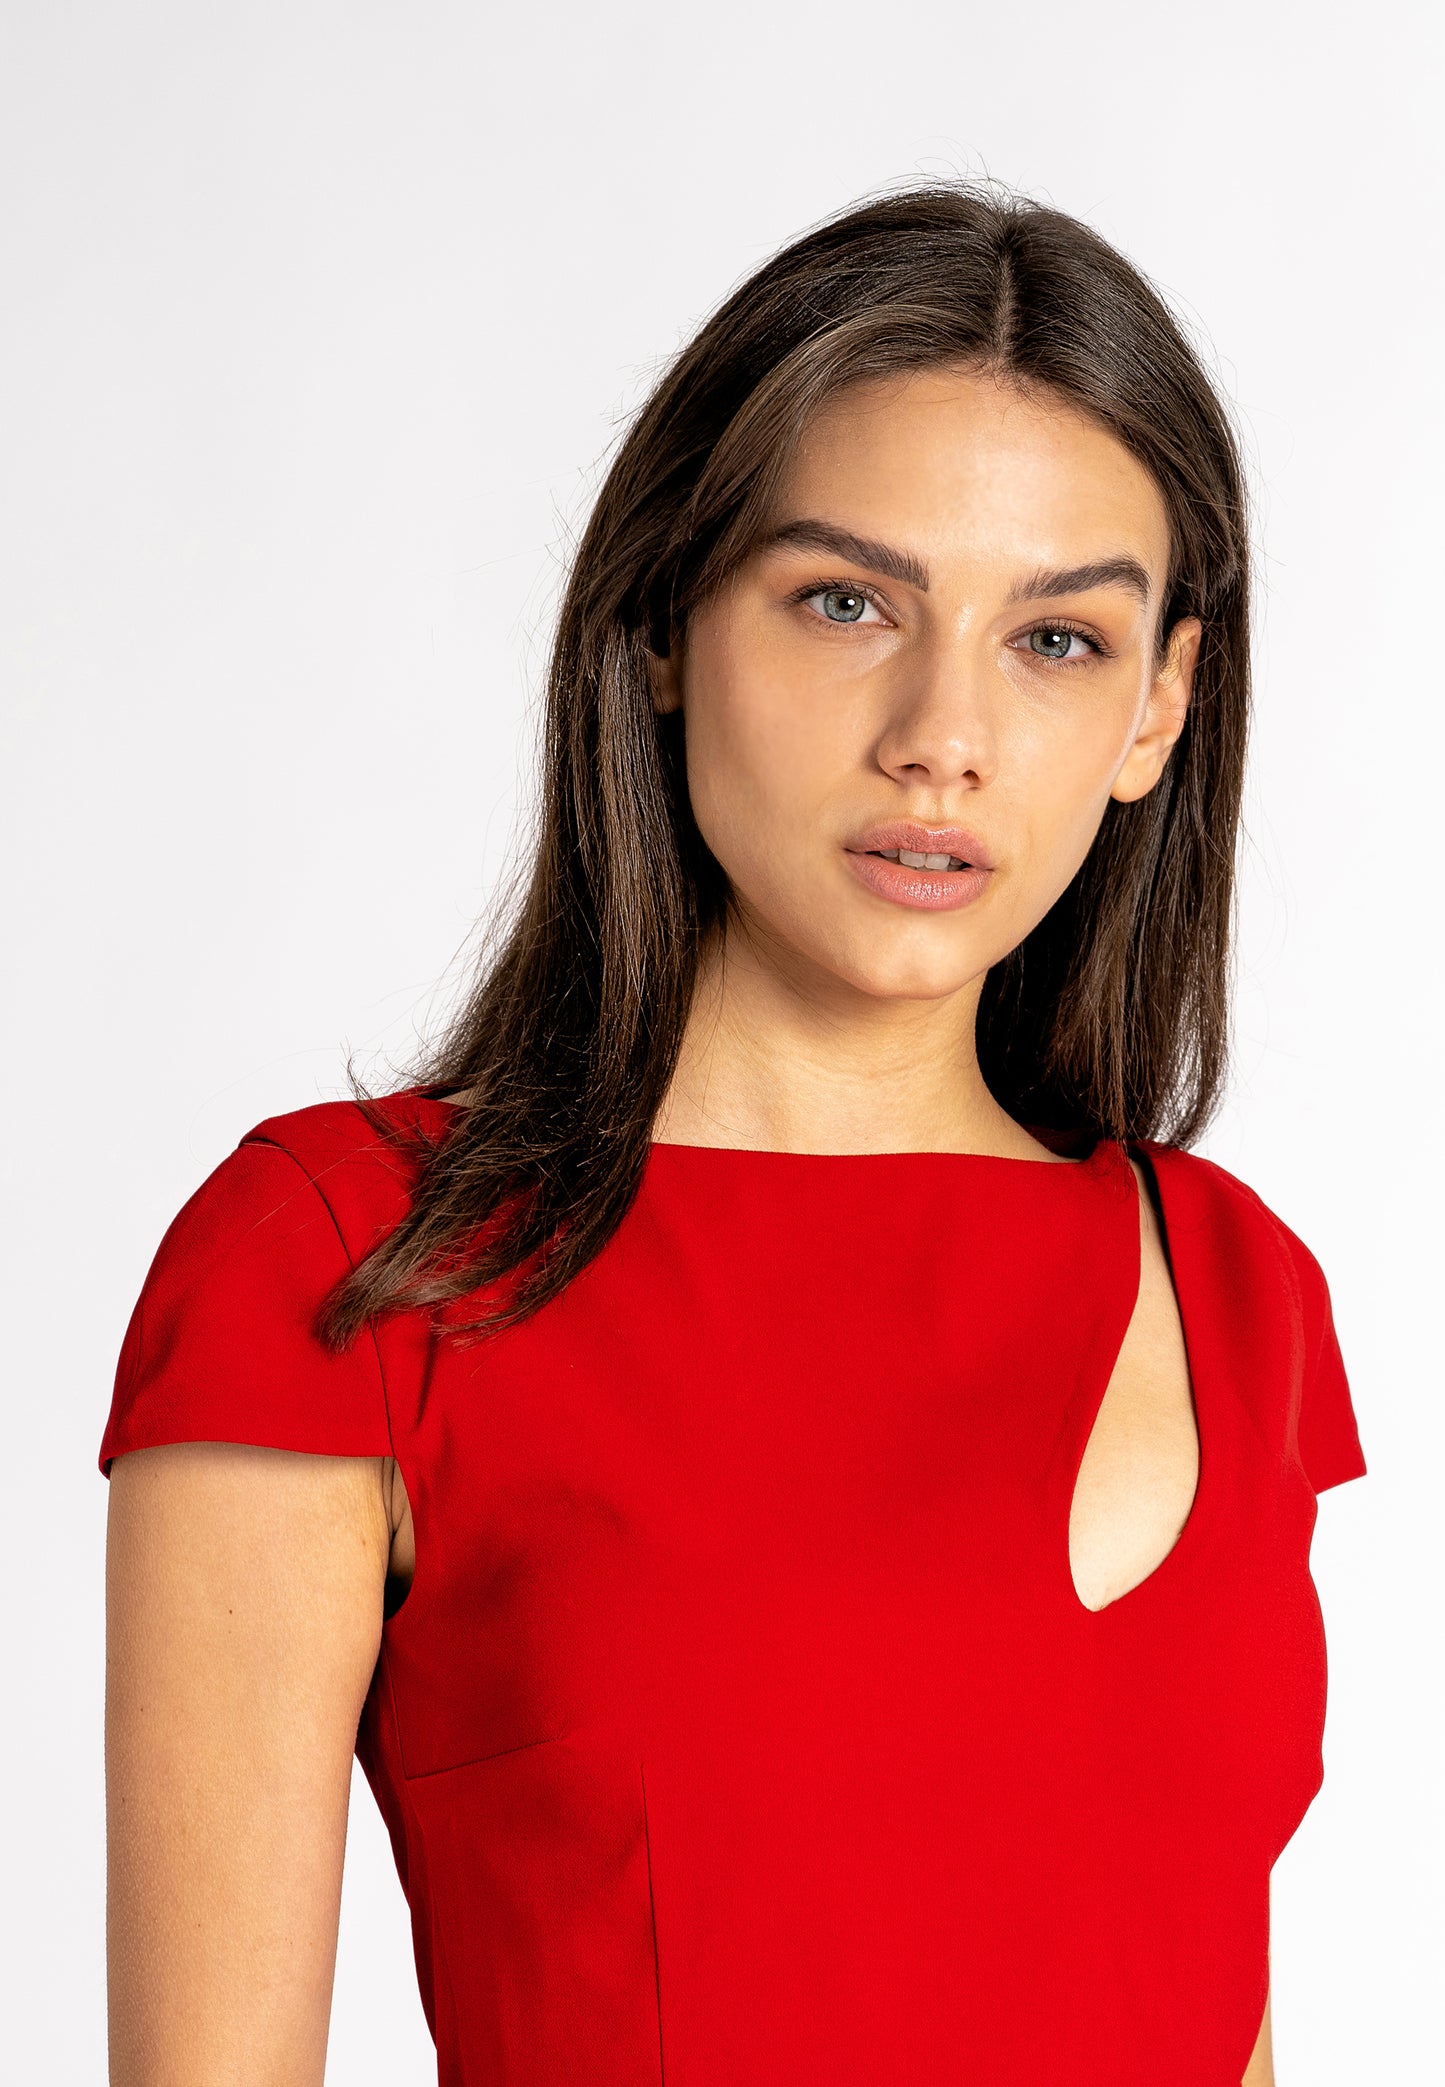 sustainable dresses australia  midi dress red cut out neck dress  red cut out midi dress midi cut out dress tubino goccia sheath dress sheath dress australia sheathdress red women cut out dress  red dress  made in italy clothing winter dresses Australia